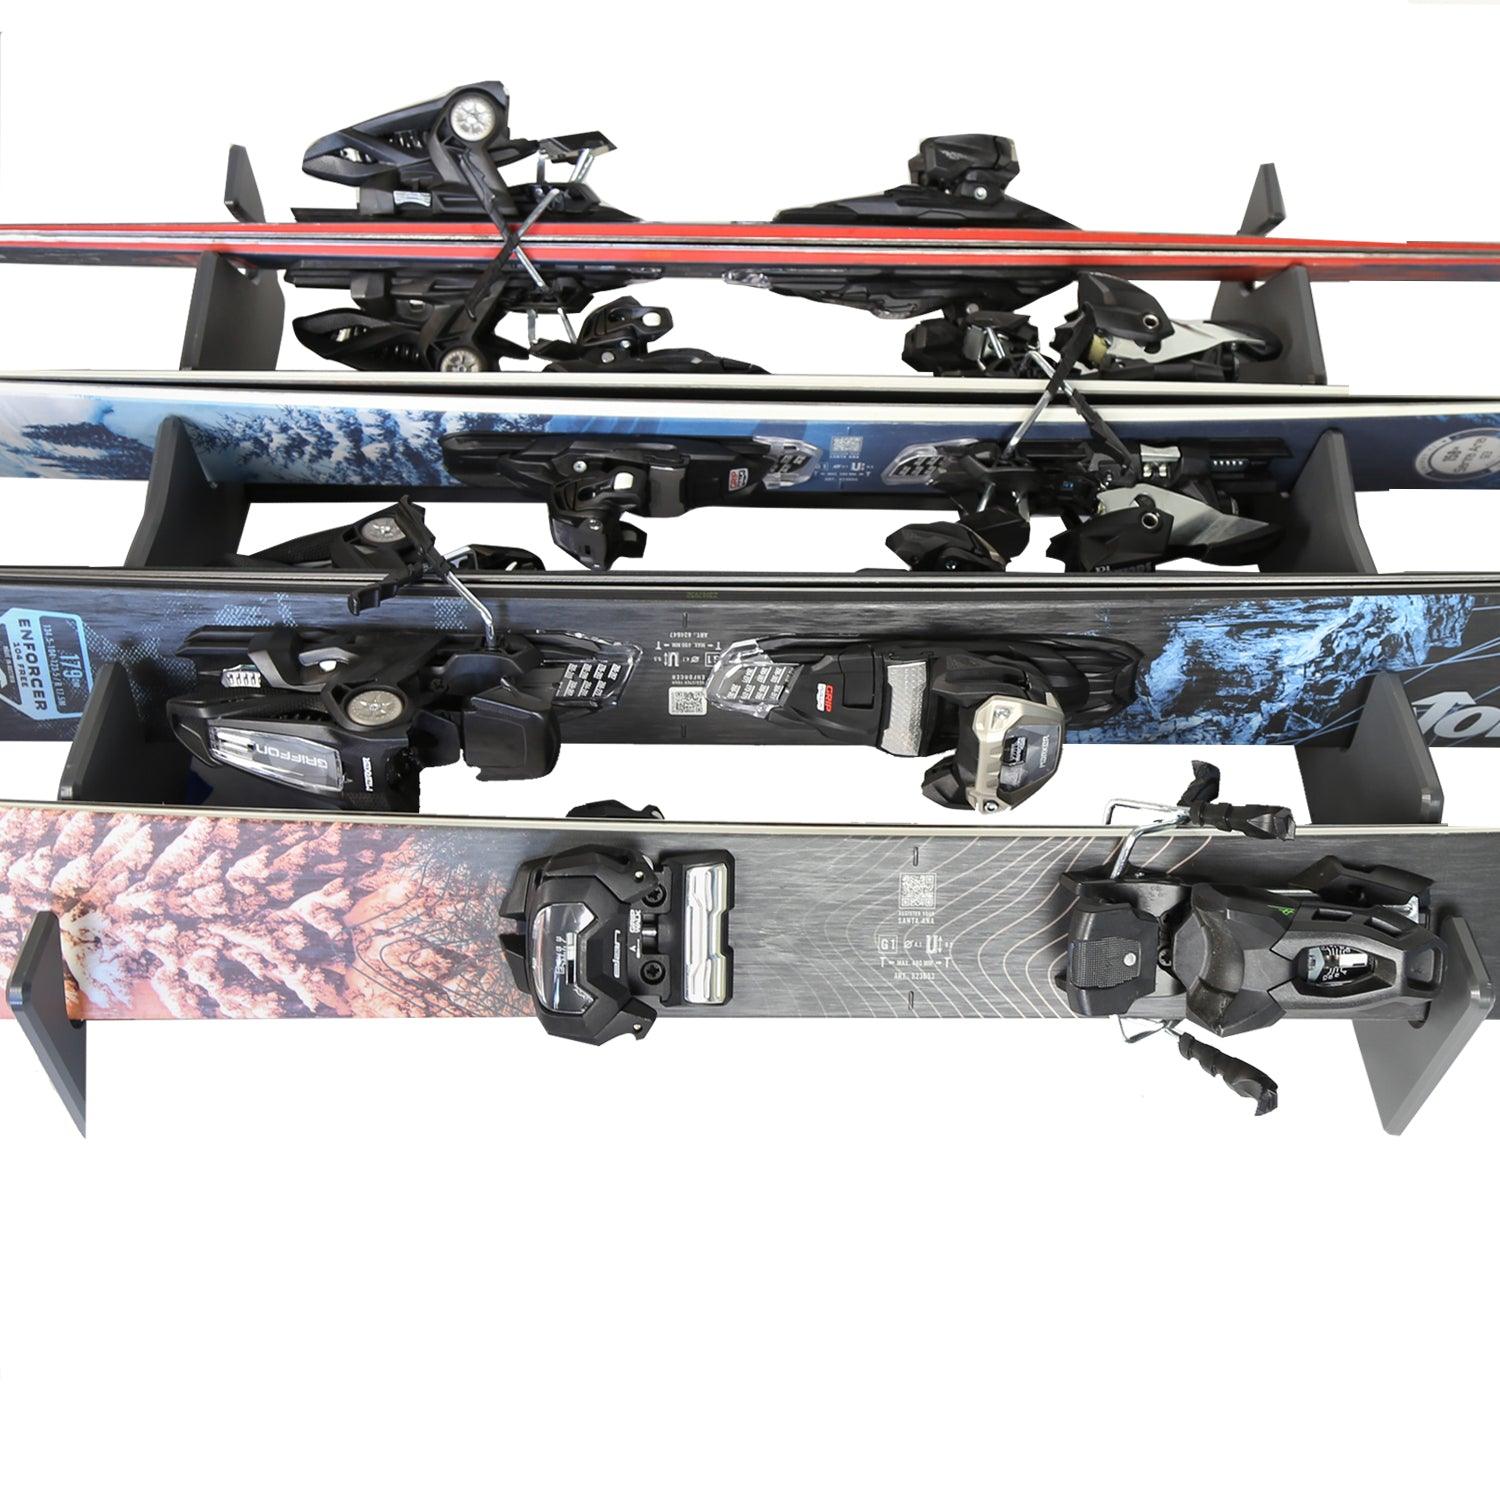 TRAPSKI LowPro 4 L Ski and Snowboard Rack Insert for Rooftop Cargo Box | High Quality Marine Grade HDPE Plastic | Premium Strap Included | 3 Year Warranty | Made in the USA | Veteran Owned Business - TRAPSKI, LLC